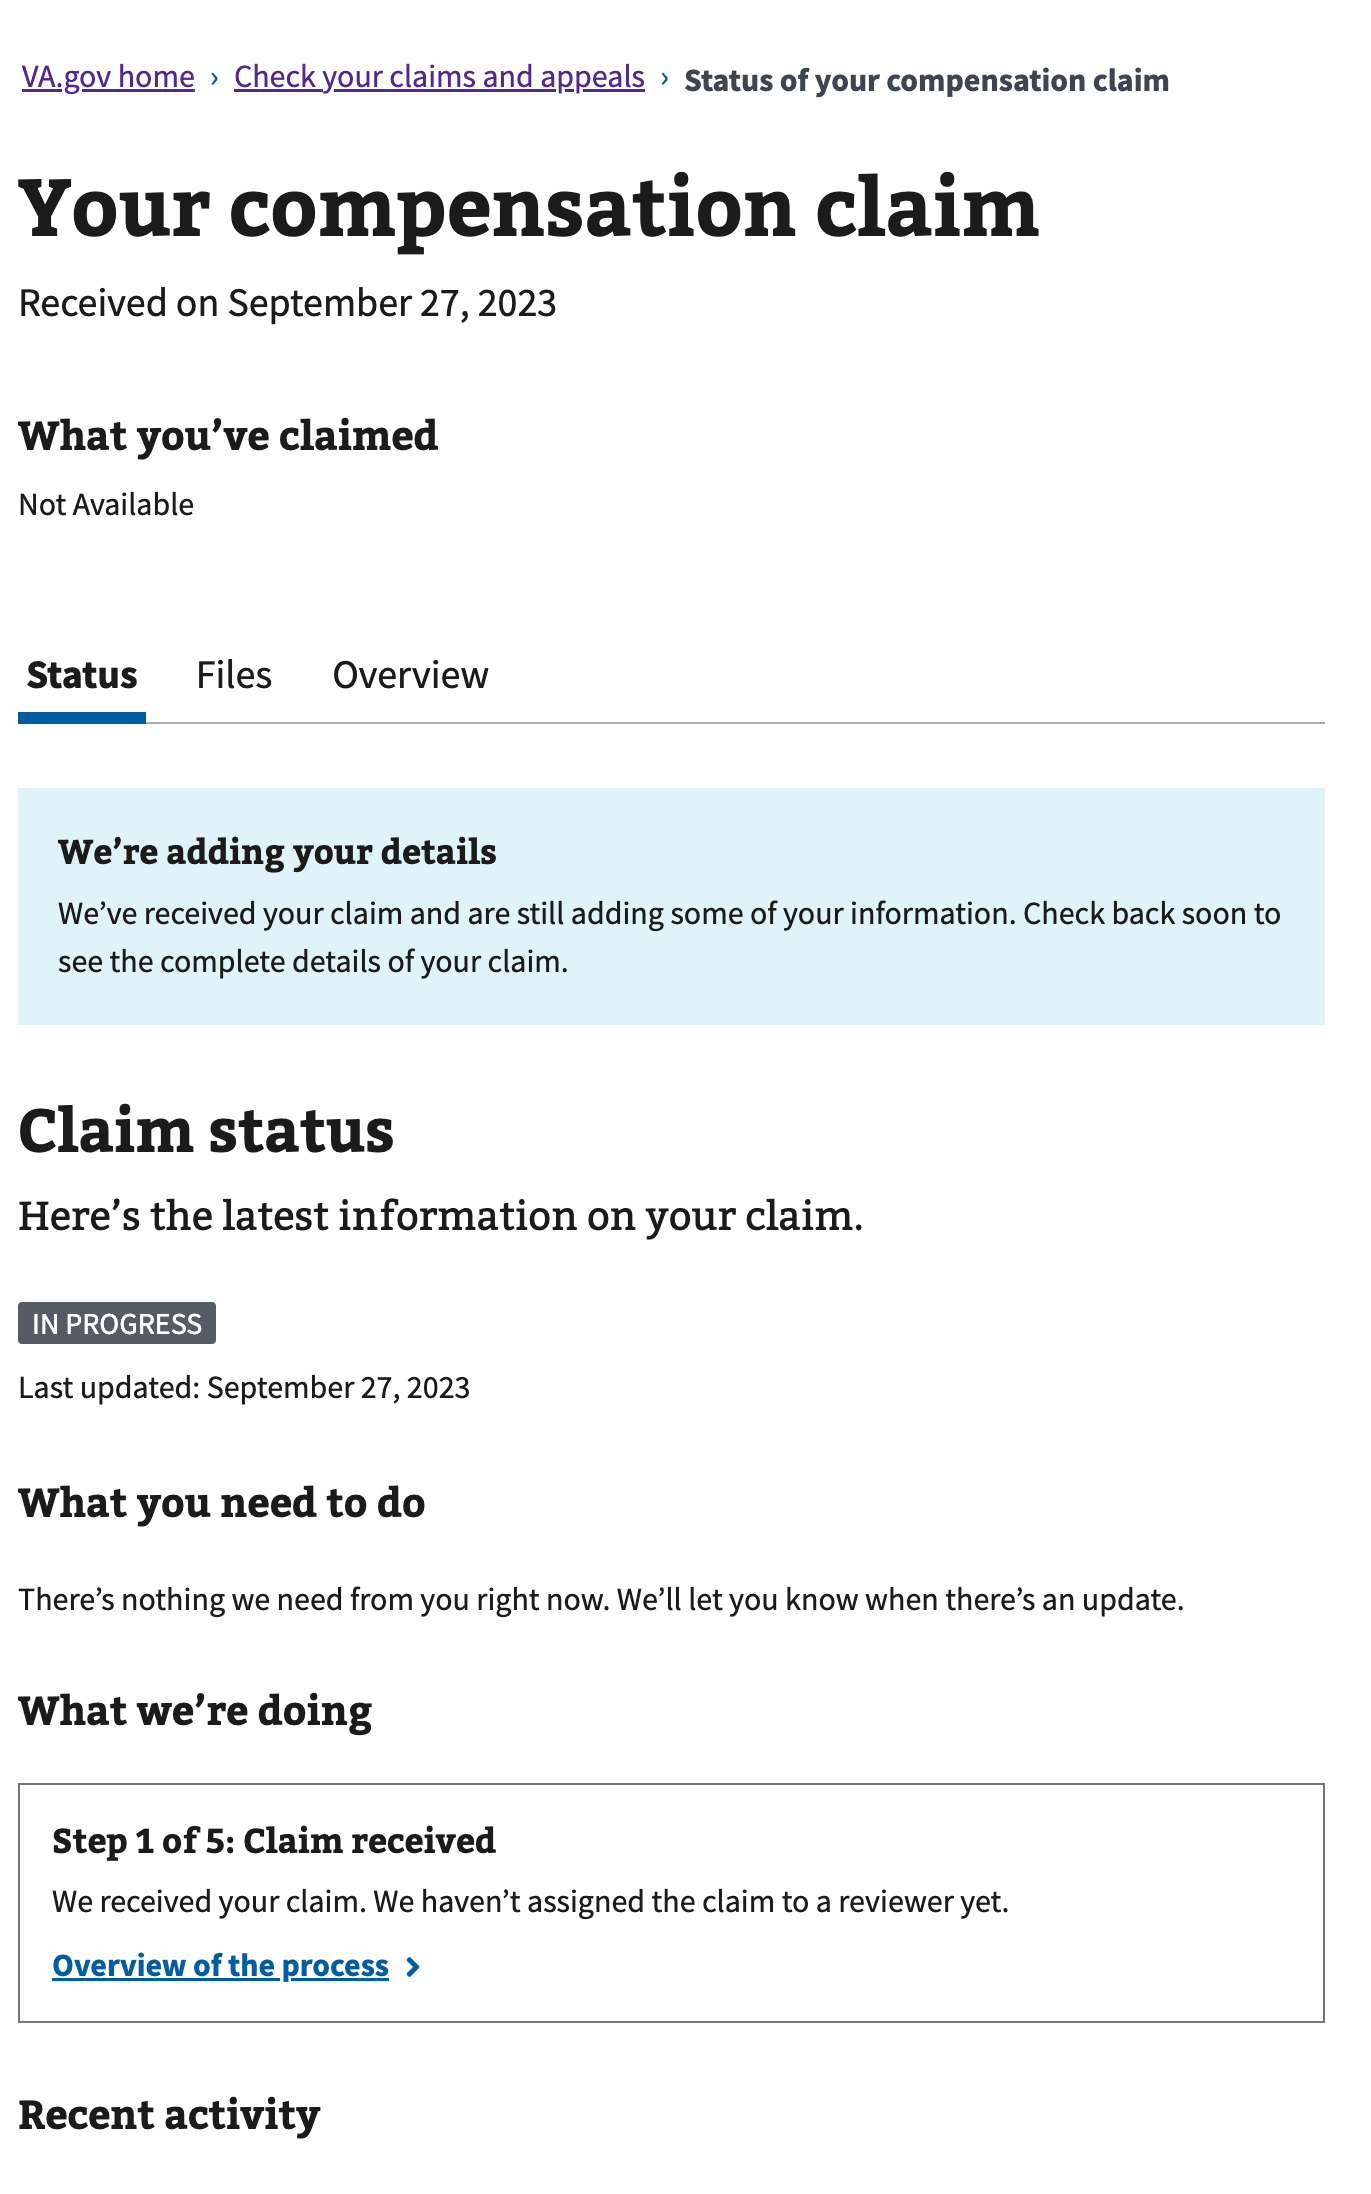 An example of the track your claims page.